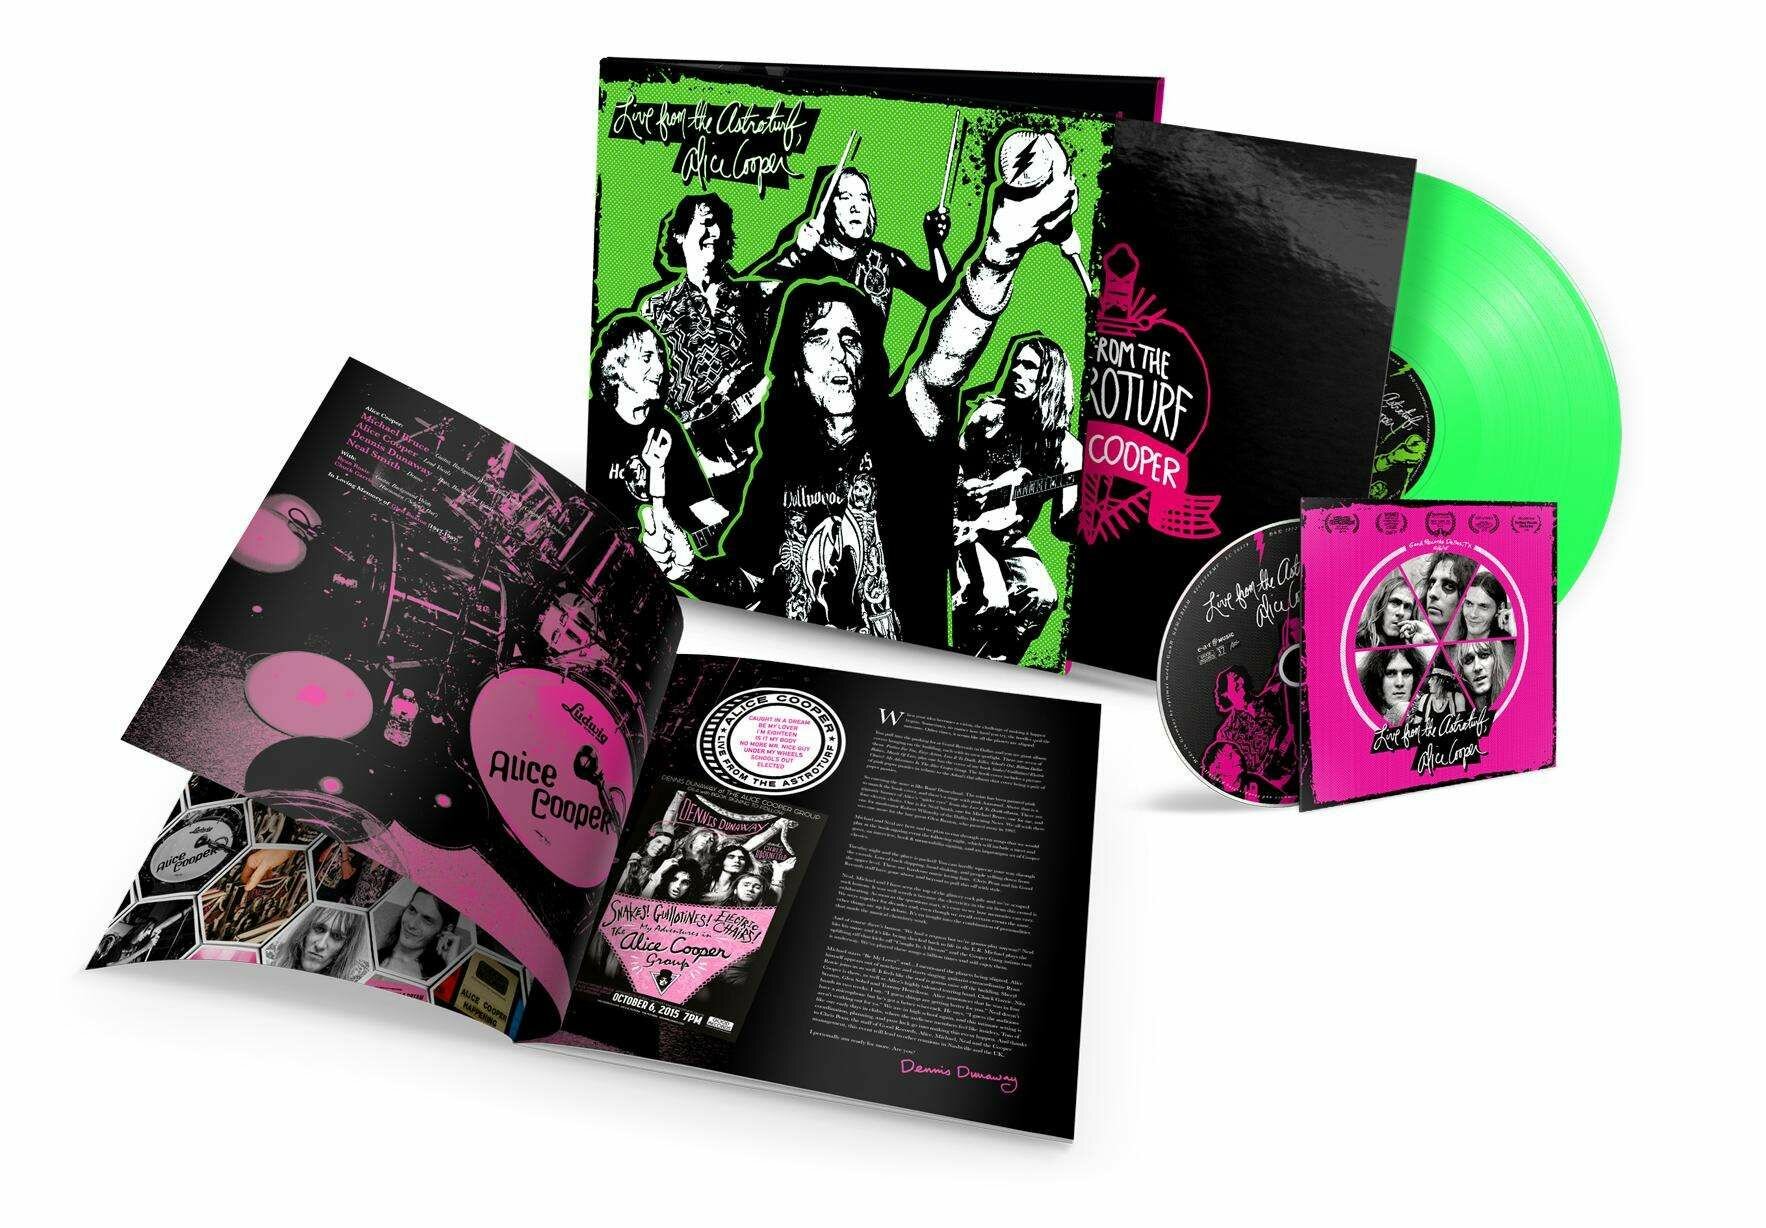 Виниловая пластинка Alice Cooper - Live From The Astroturf (180g) (Limited Numbered Edition) (Glow In The Dark Vinyl) (1 DVD)